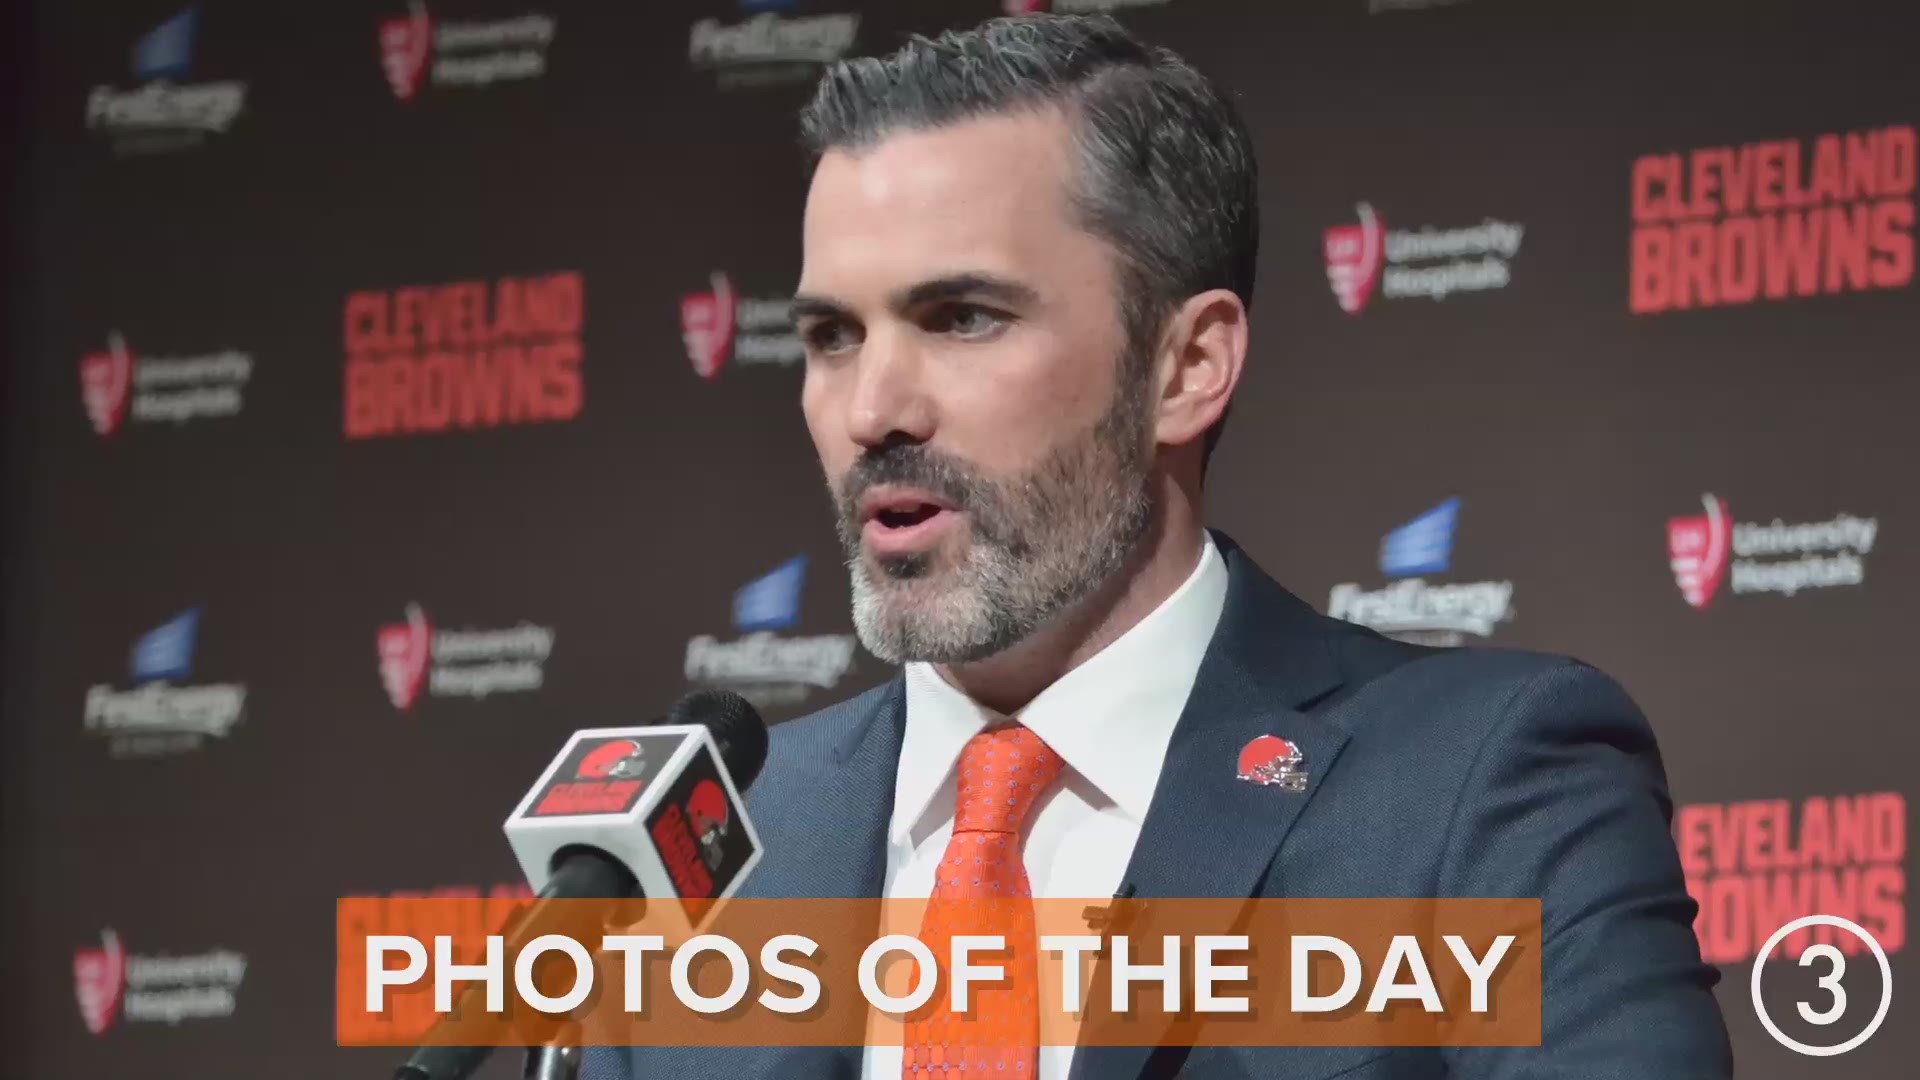 Photos of the day from FirstEnergy Stadium!  The Cleveland Browns introduce their new head coach Kevin Stefanski.